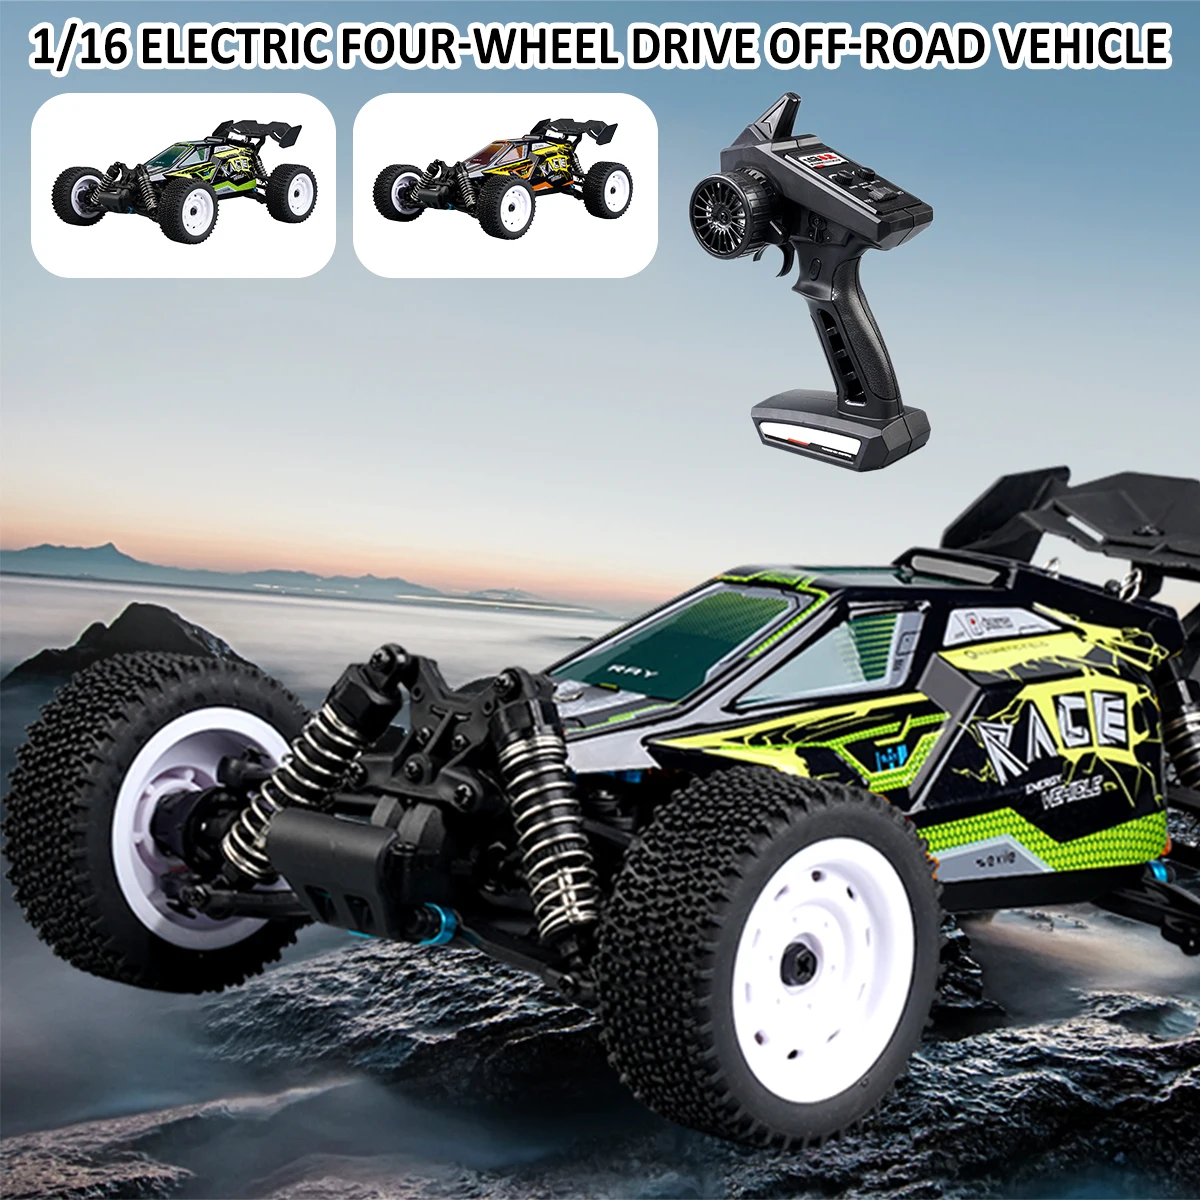 SCY-16201 Remote Control Car Drift 35km/h RC Racing Car High Speed Off-Road RC Car For Kids Gifts 1:16 RC Car enlarge